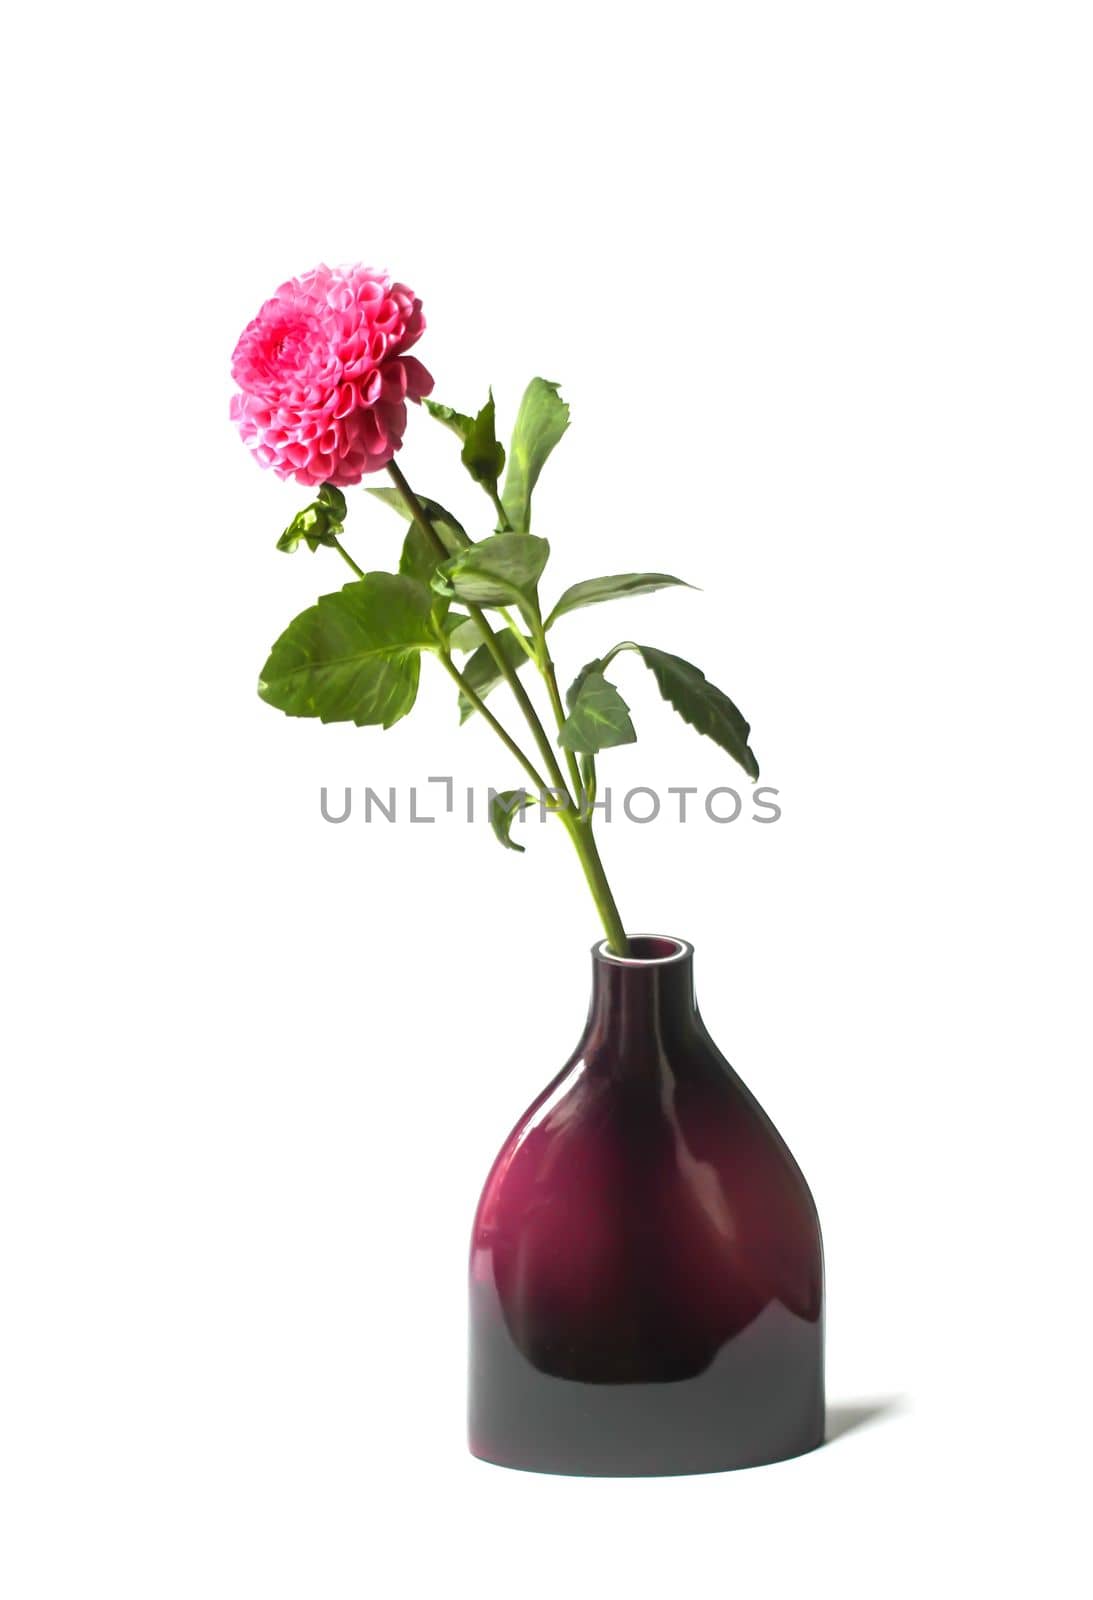 Beautiful pink dahlia flower in a vase. Beautiful plant flowering at summer.